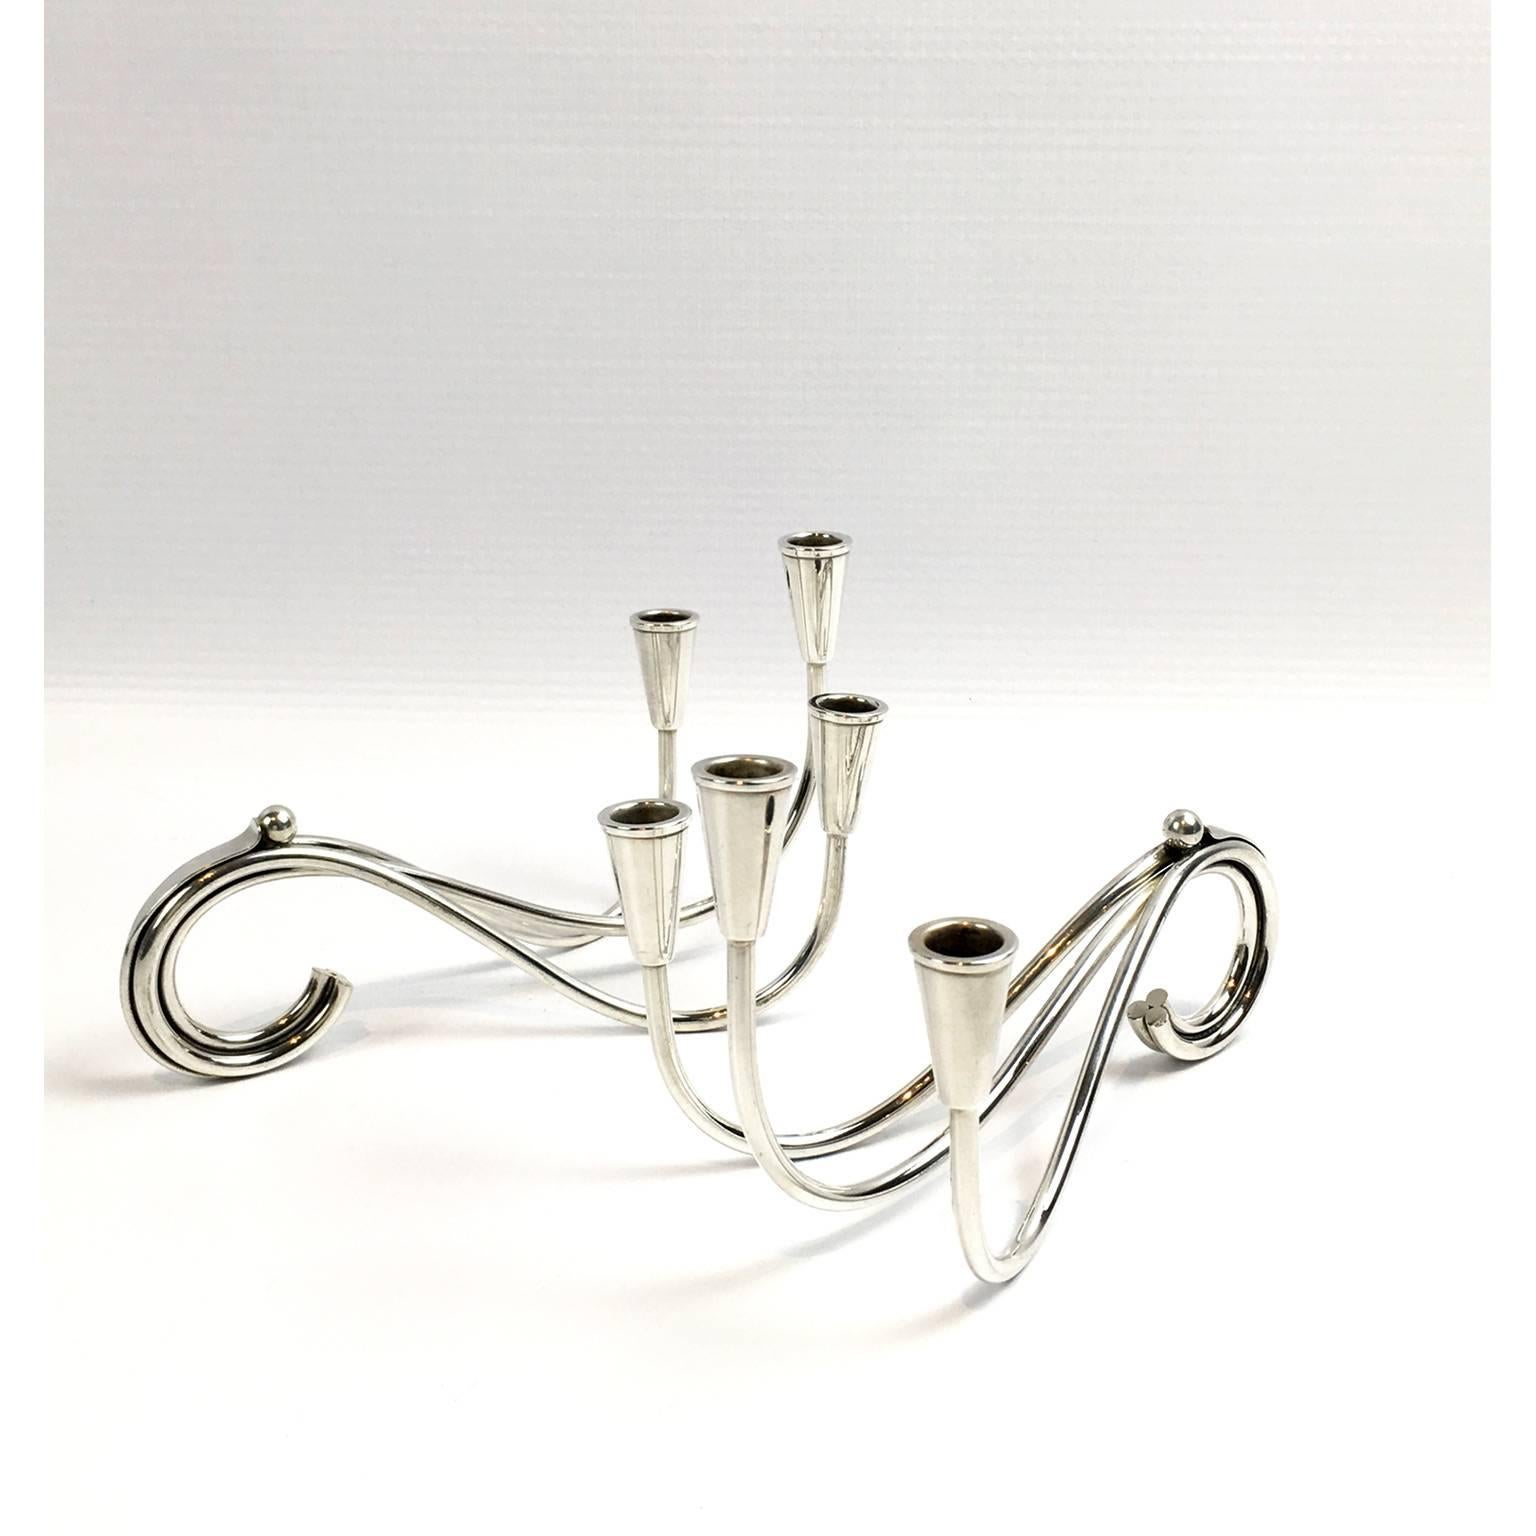 Hand-Crafted Pair of Silver Plated Candleholders by Carl Frederik Christiansen For Sale